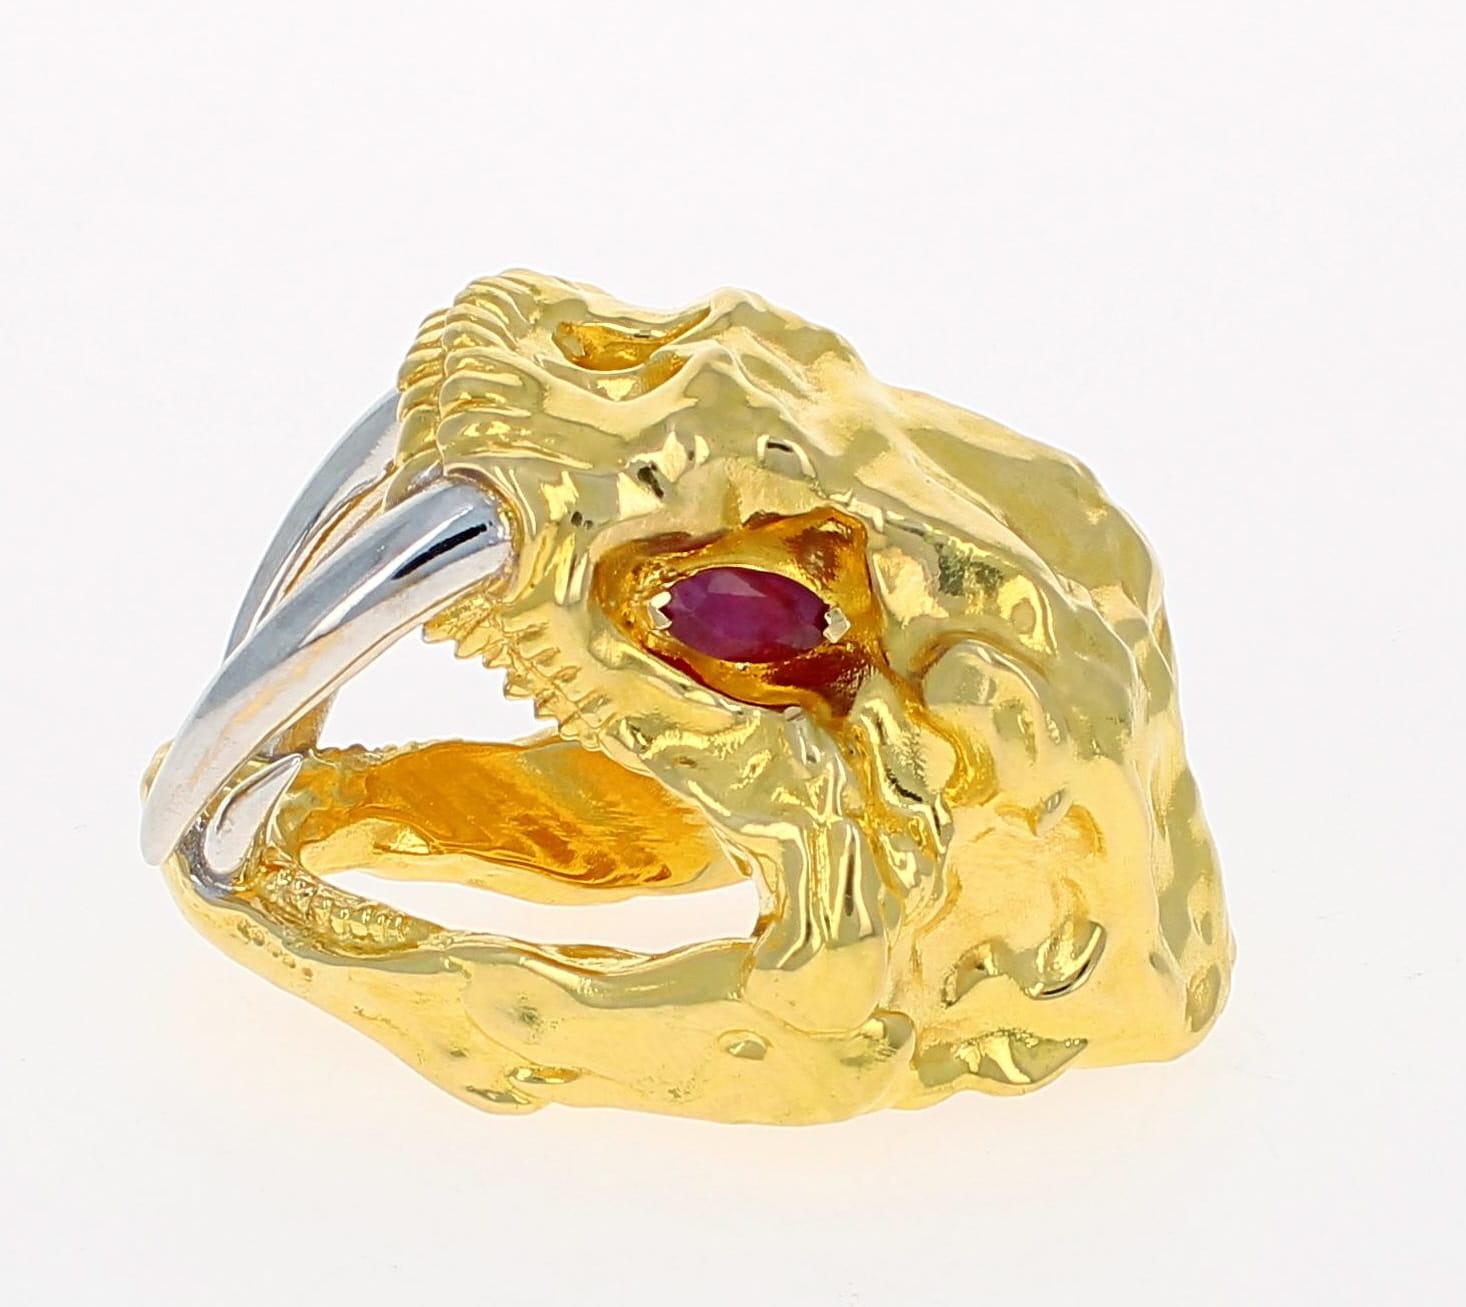 An 18K Solid Gold Monster. Weighing 123 grams with 1.50ccttw of natural Ruby for eyes. This piece is one of a kind and can be seen from across the room. Size 11